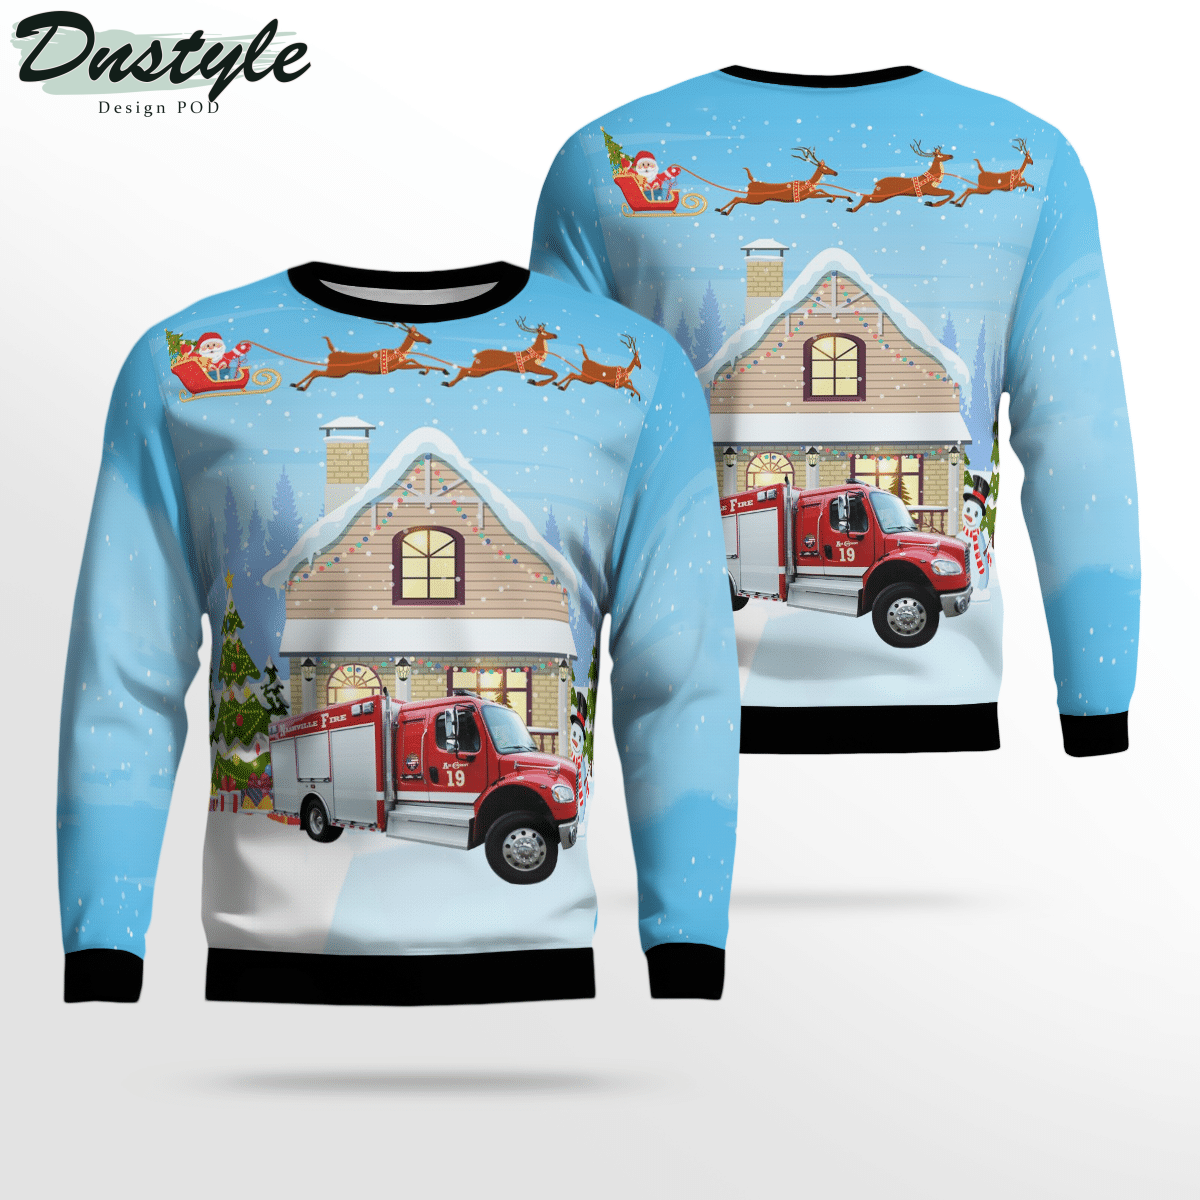 Tennessee Nashville Fire Department Rescue Truck Ugly Christmas Sweater